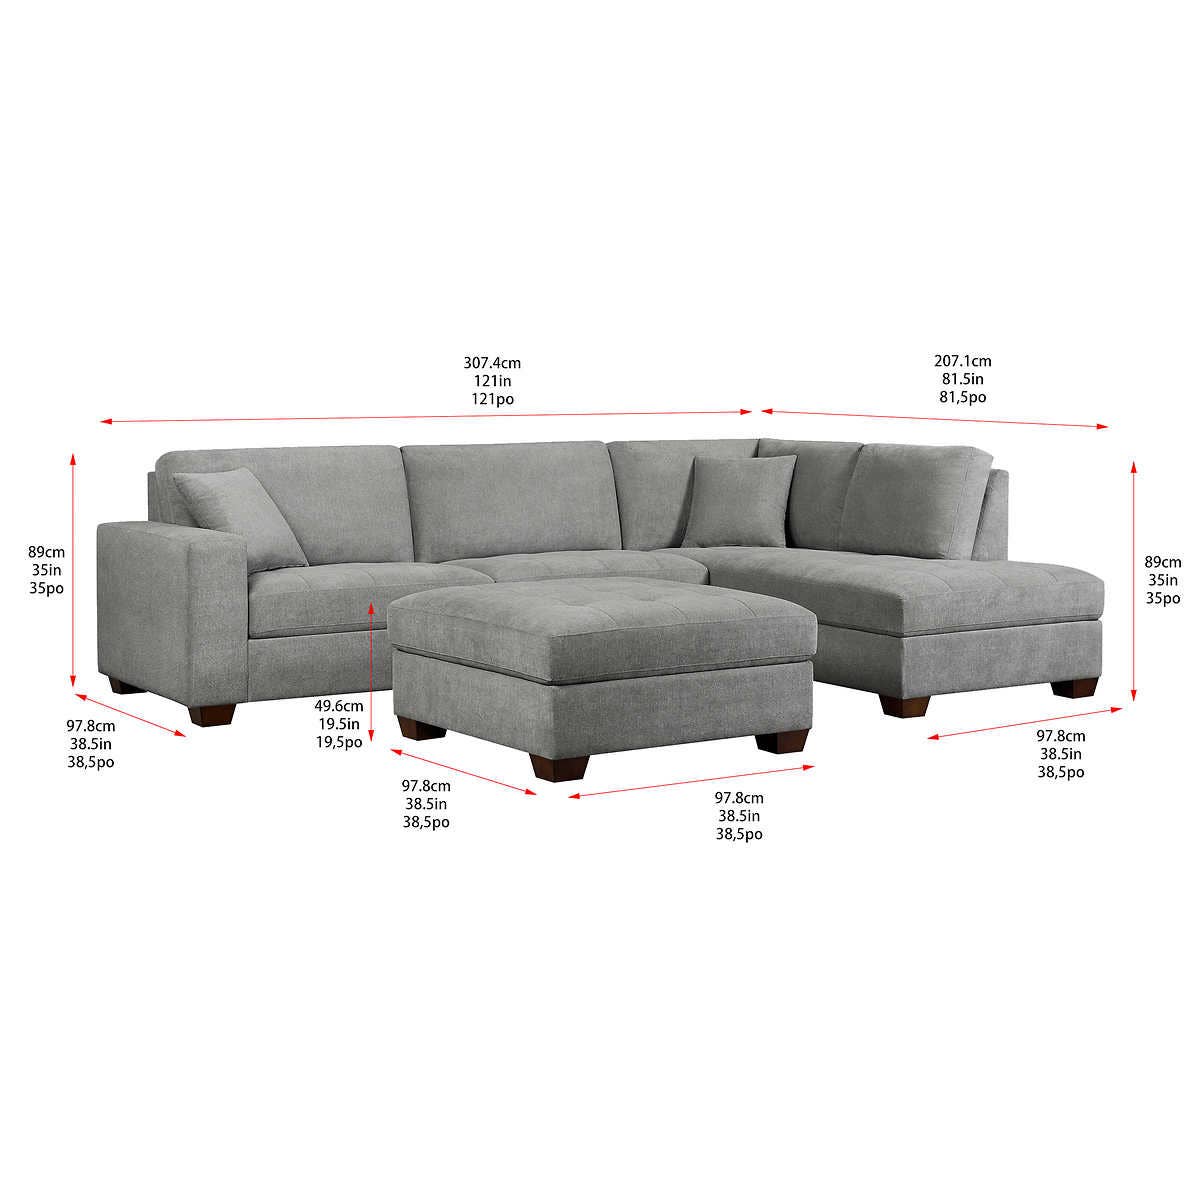 NEW - Costco - Thomasville Miles Fabric Sectional with Storage Ottoman - Retail $1799